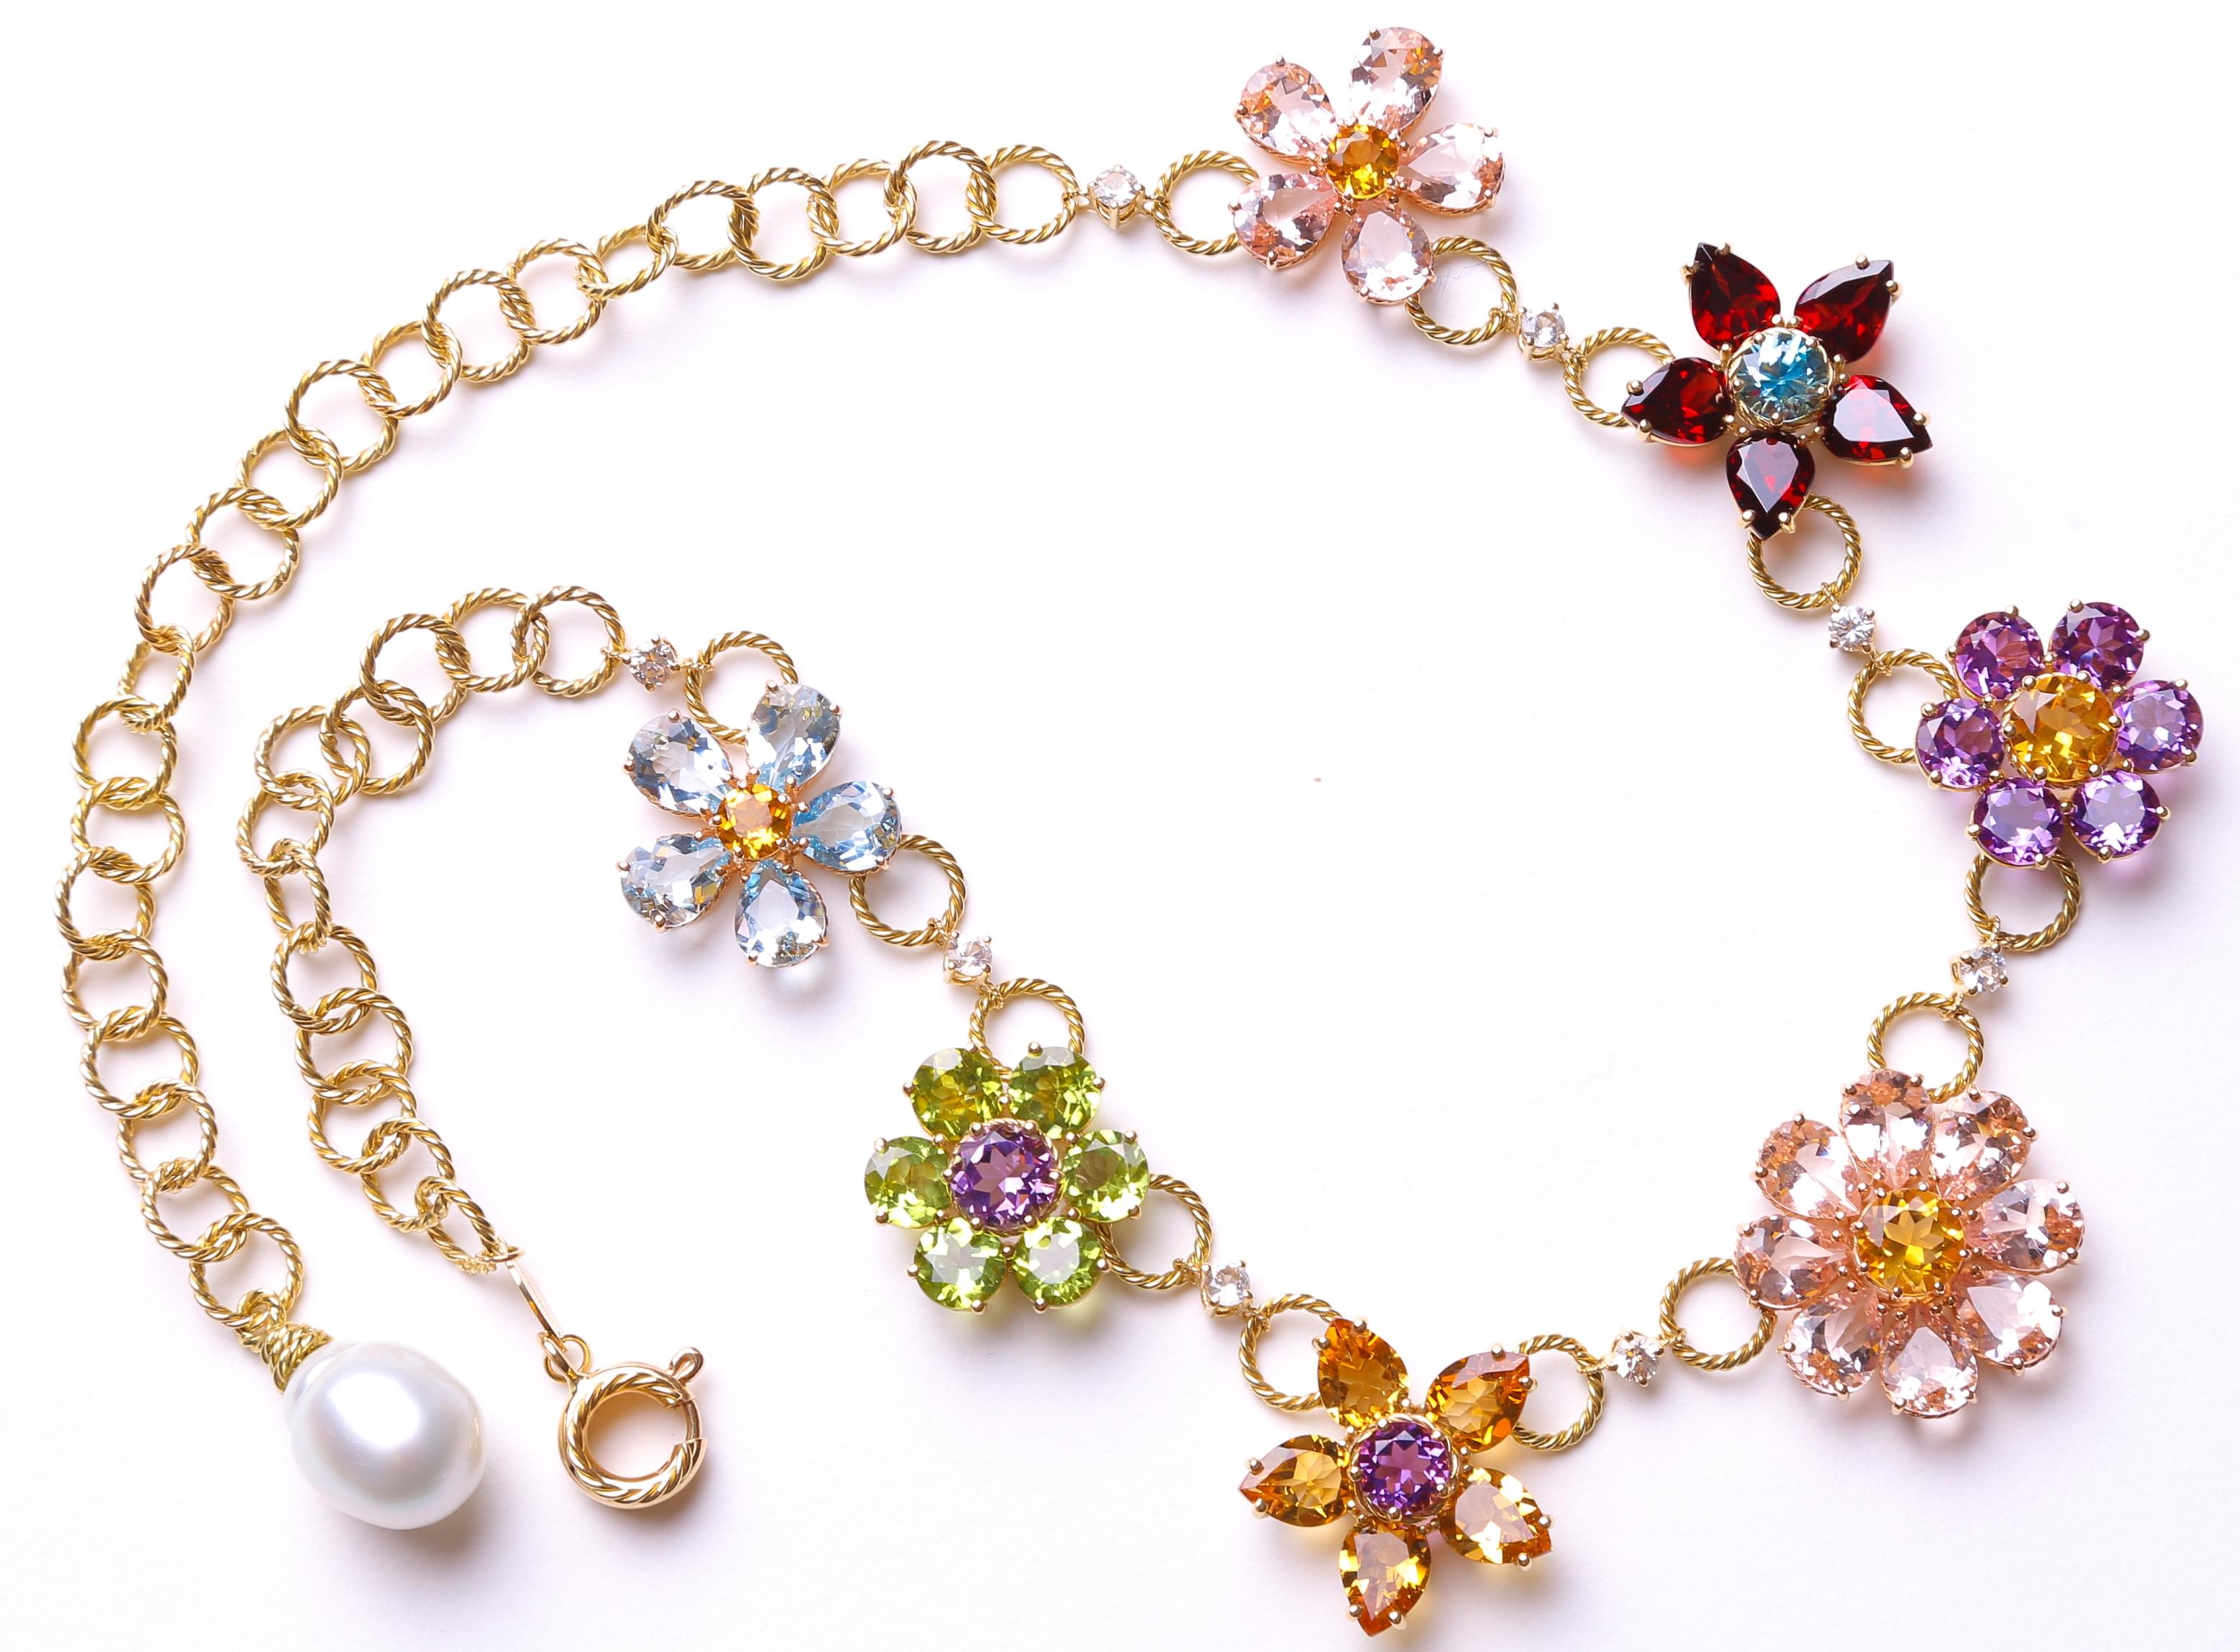  This is not costume jewellery - this is the real thing; a rare multi gem-set floral necklace by Italian Fashion House Dolce & Gabbana. This glorious piece is designed as a graduated series of seven multi-gem floral clusters with colourless sapphire